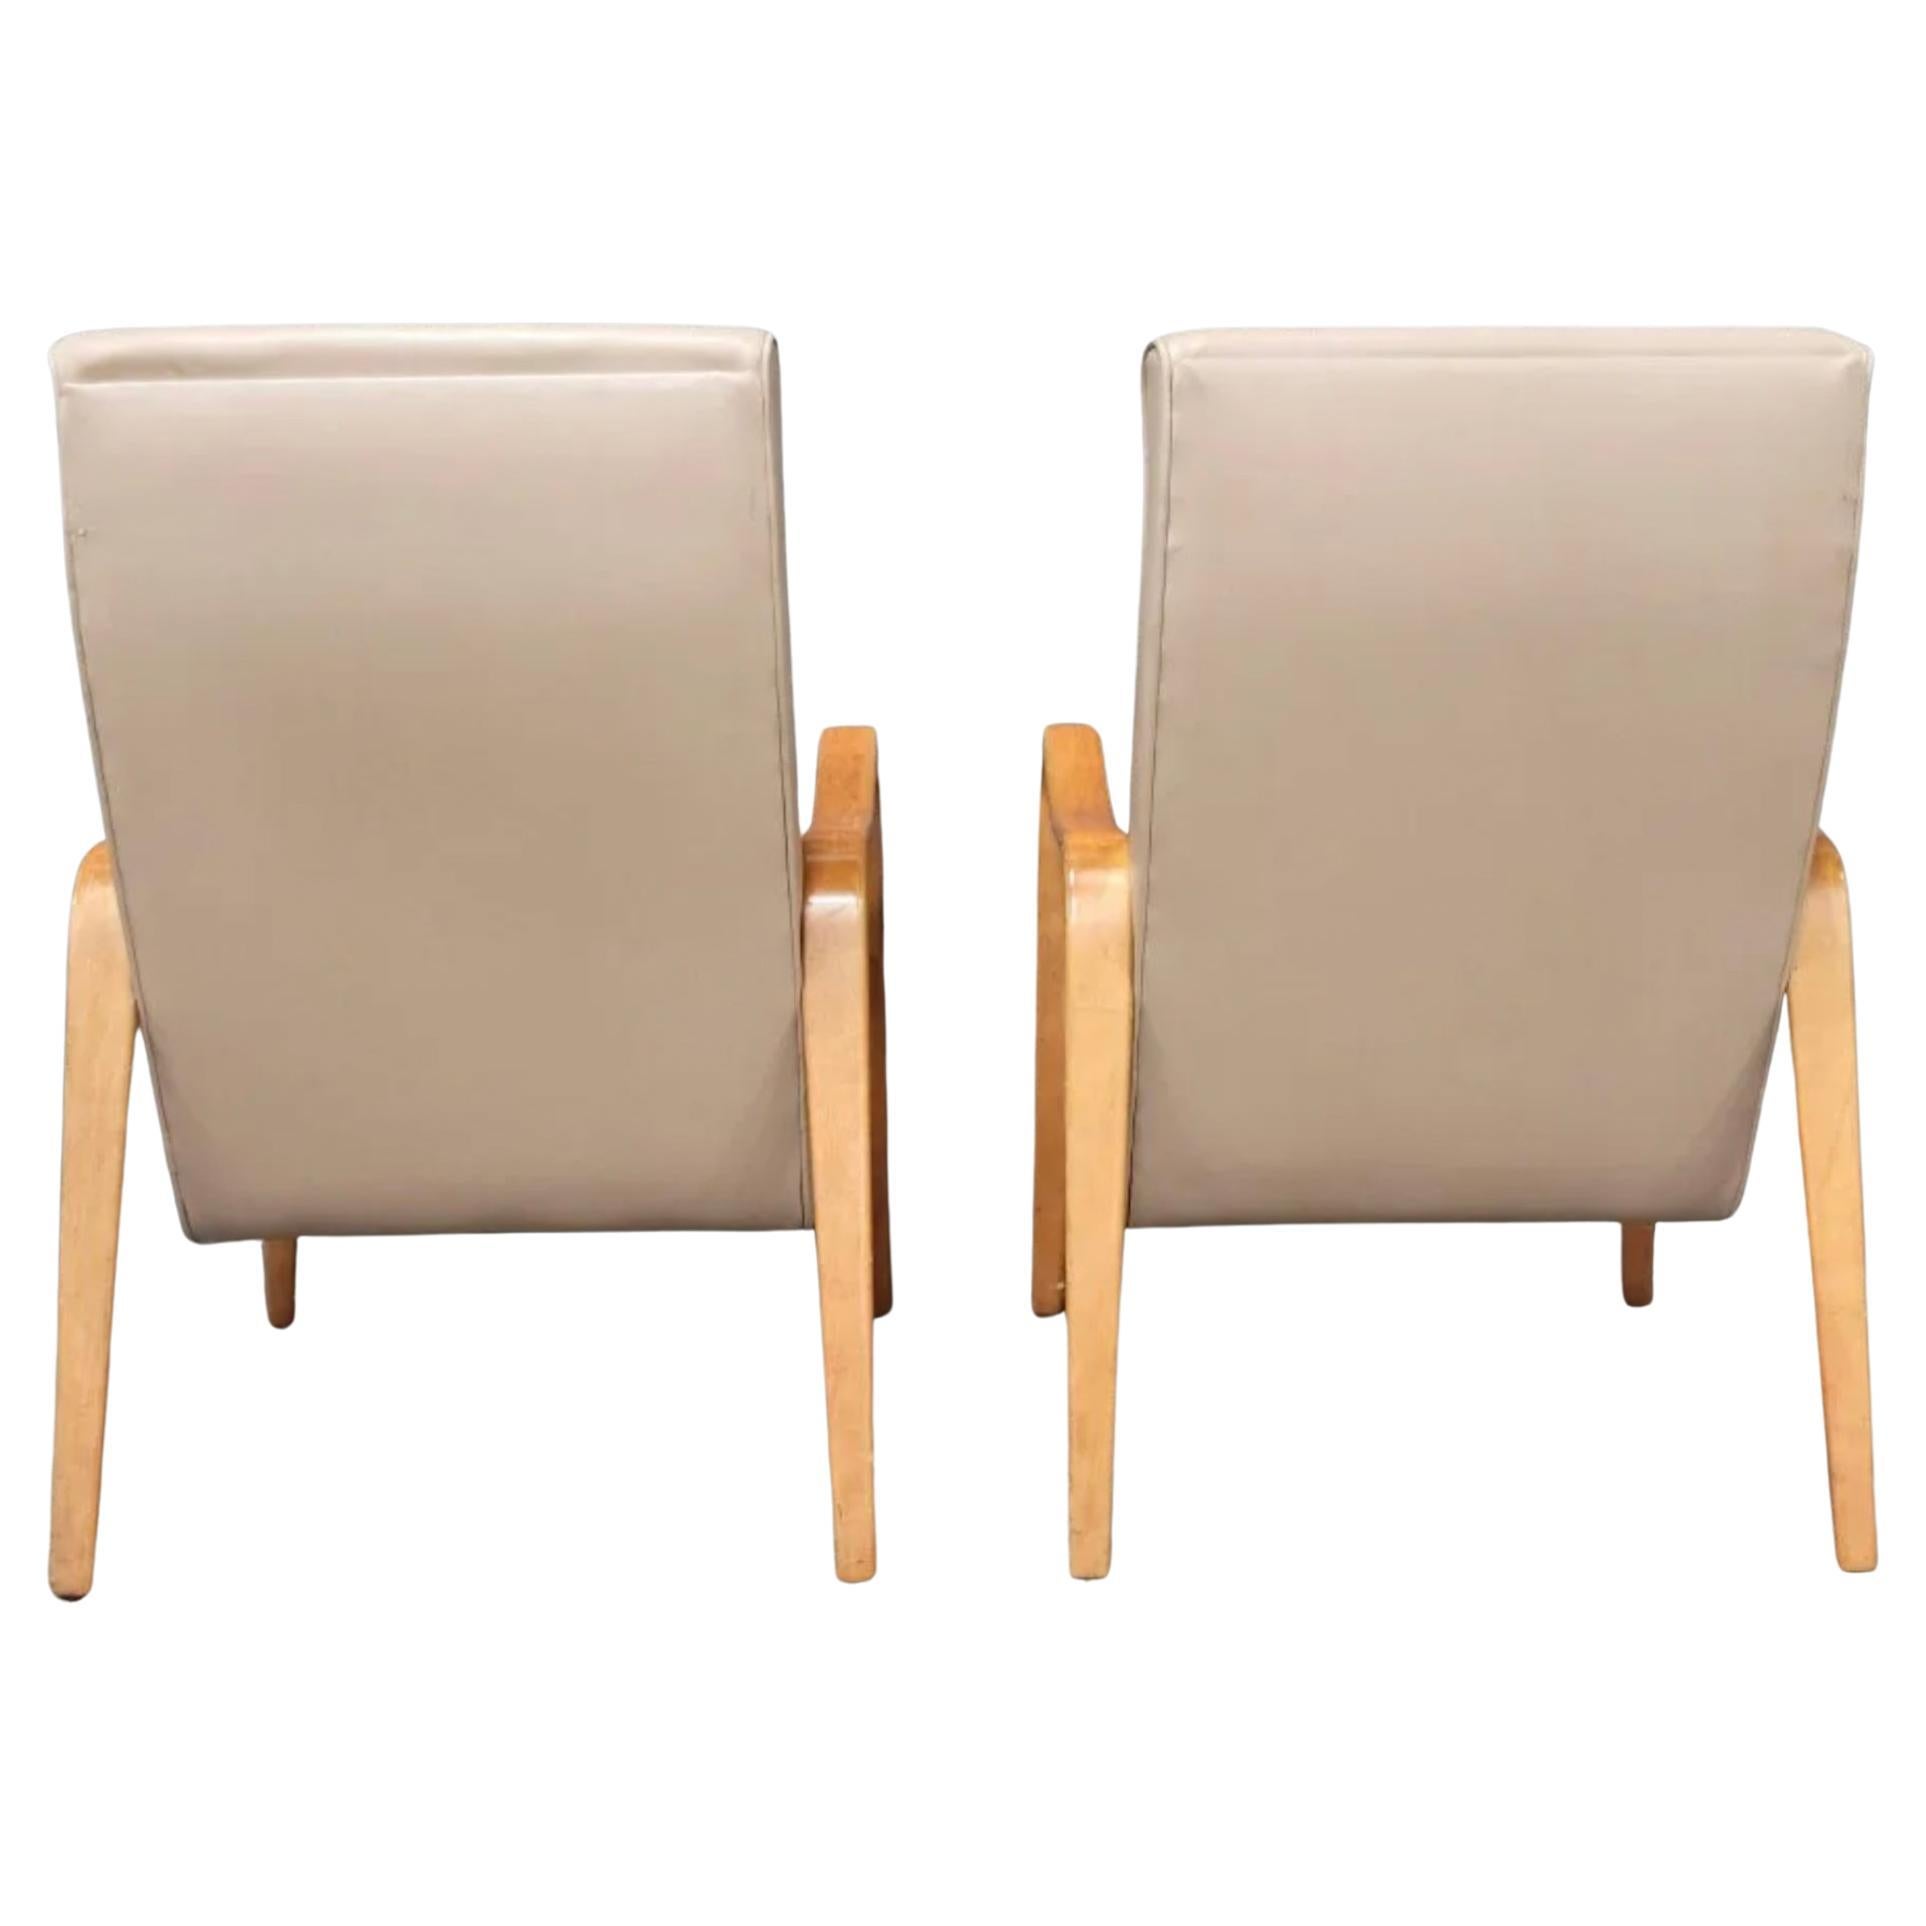 American Pair of Mid-Century Modern Thonet Bentwood Birch Lounge Arm Chairs Tan For Sale